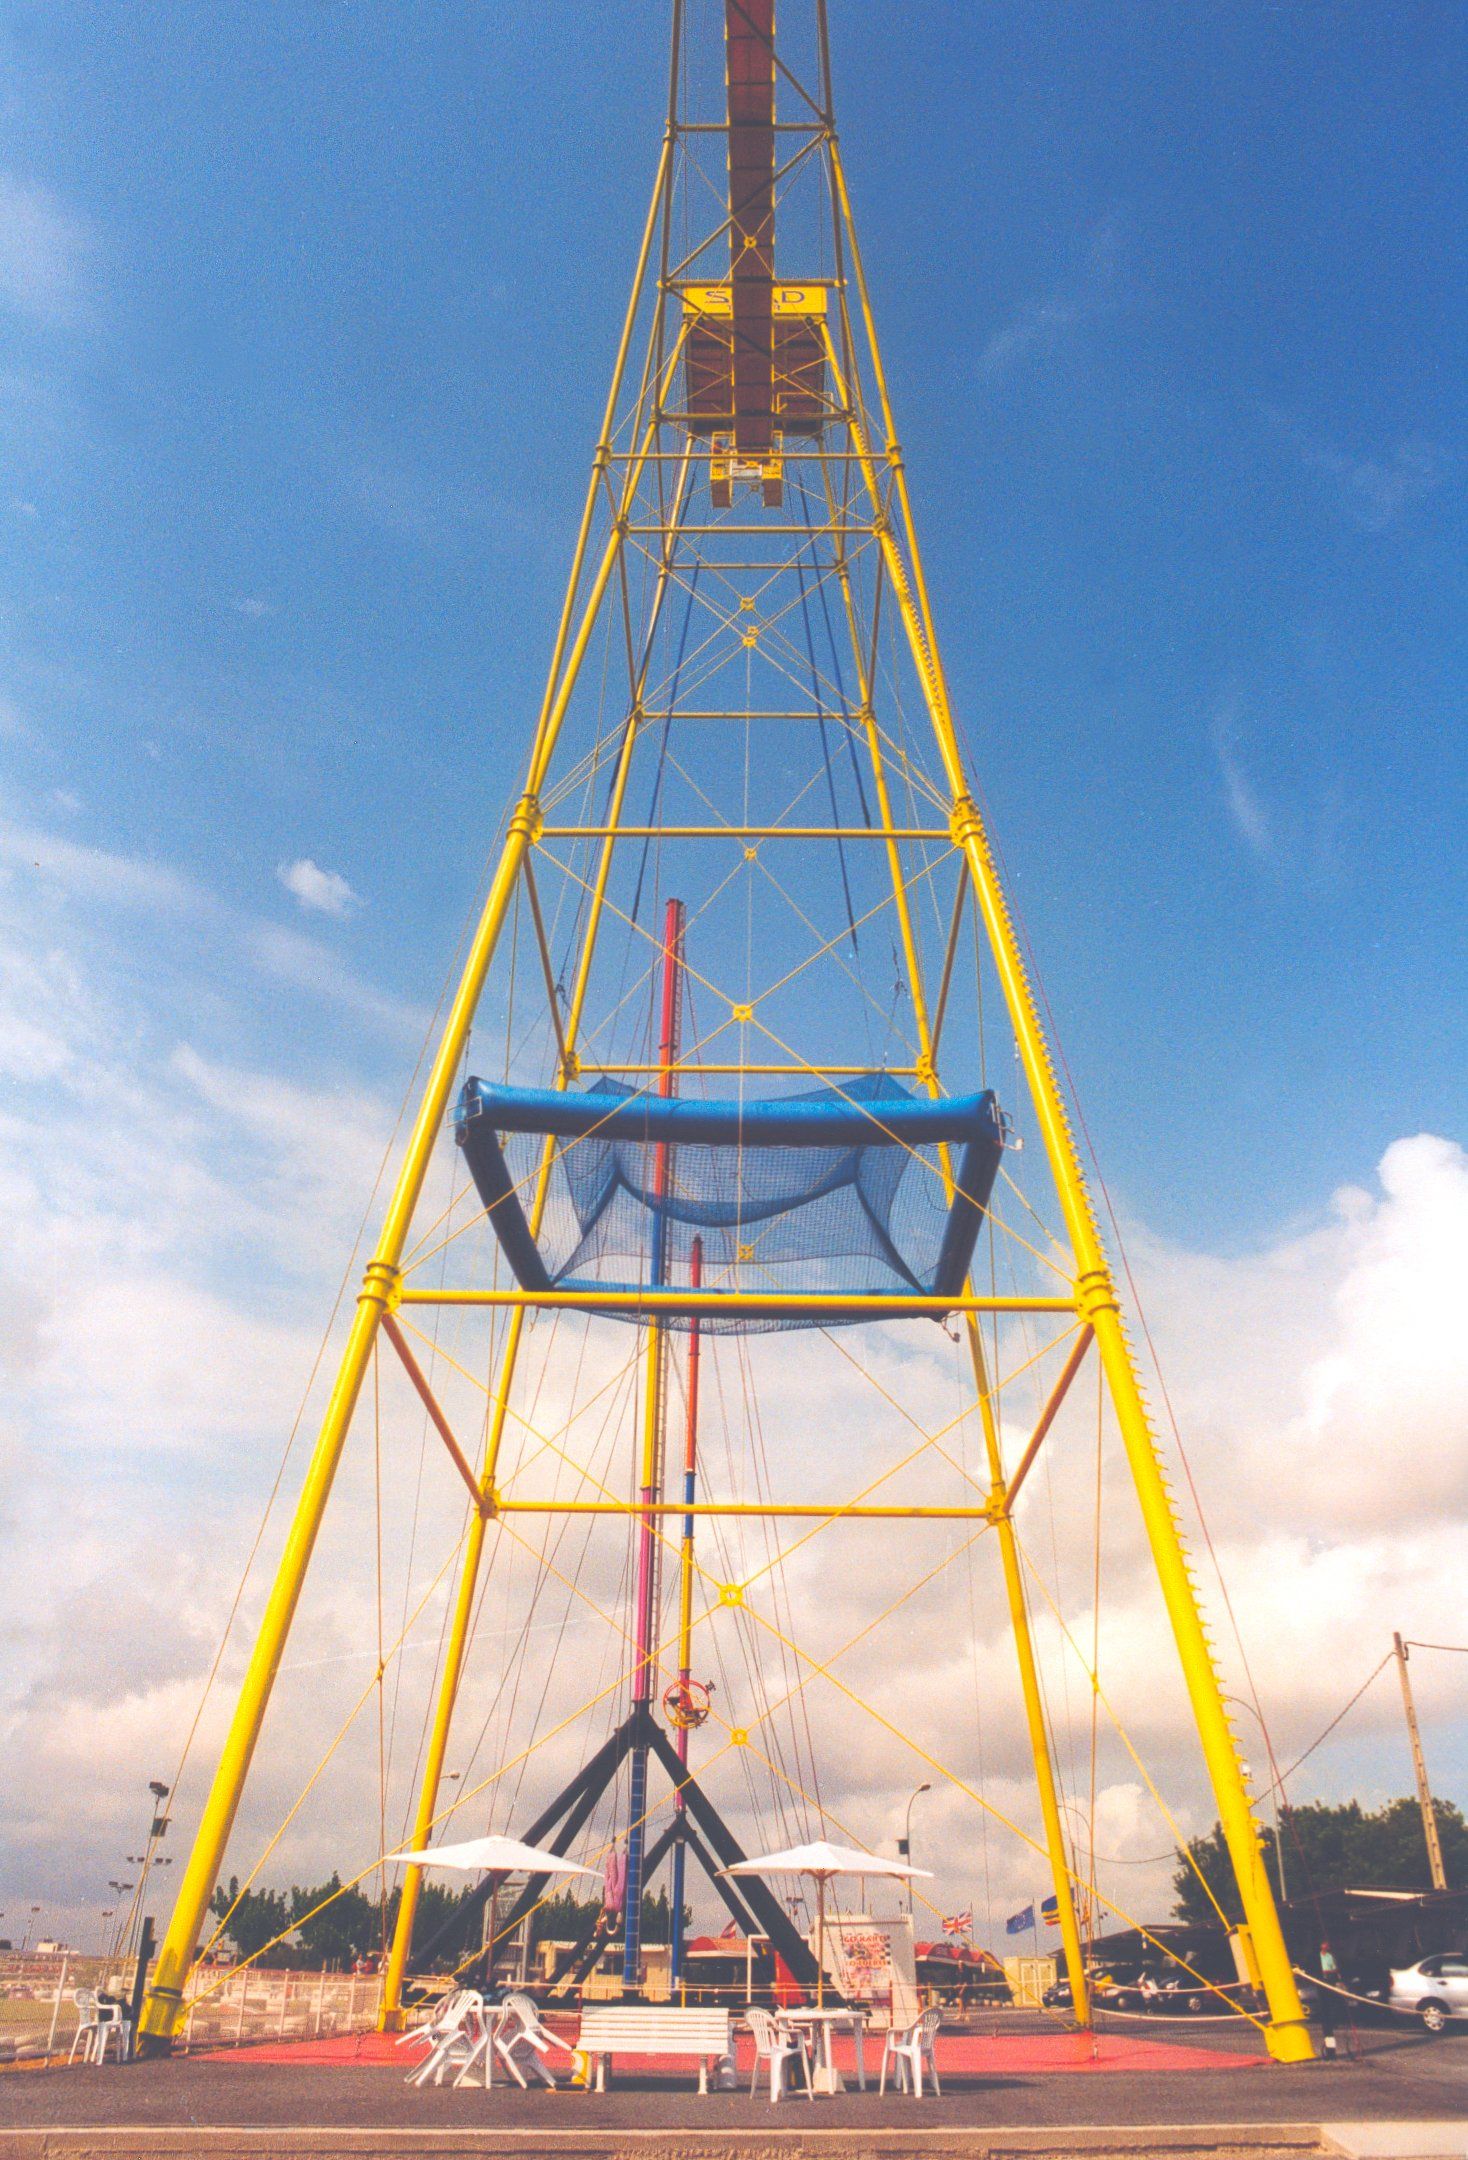 SCAD free fall tower with bungee ramp